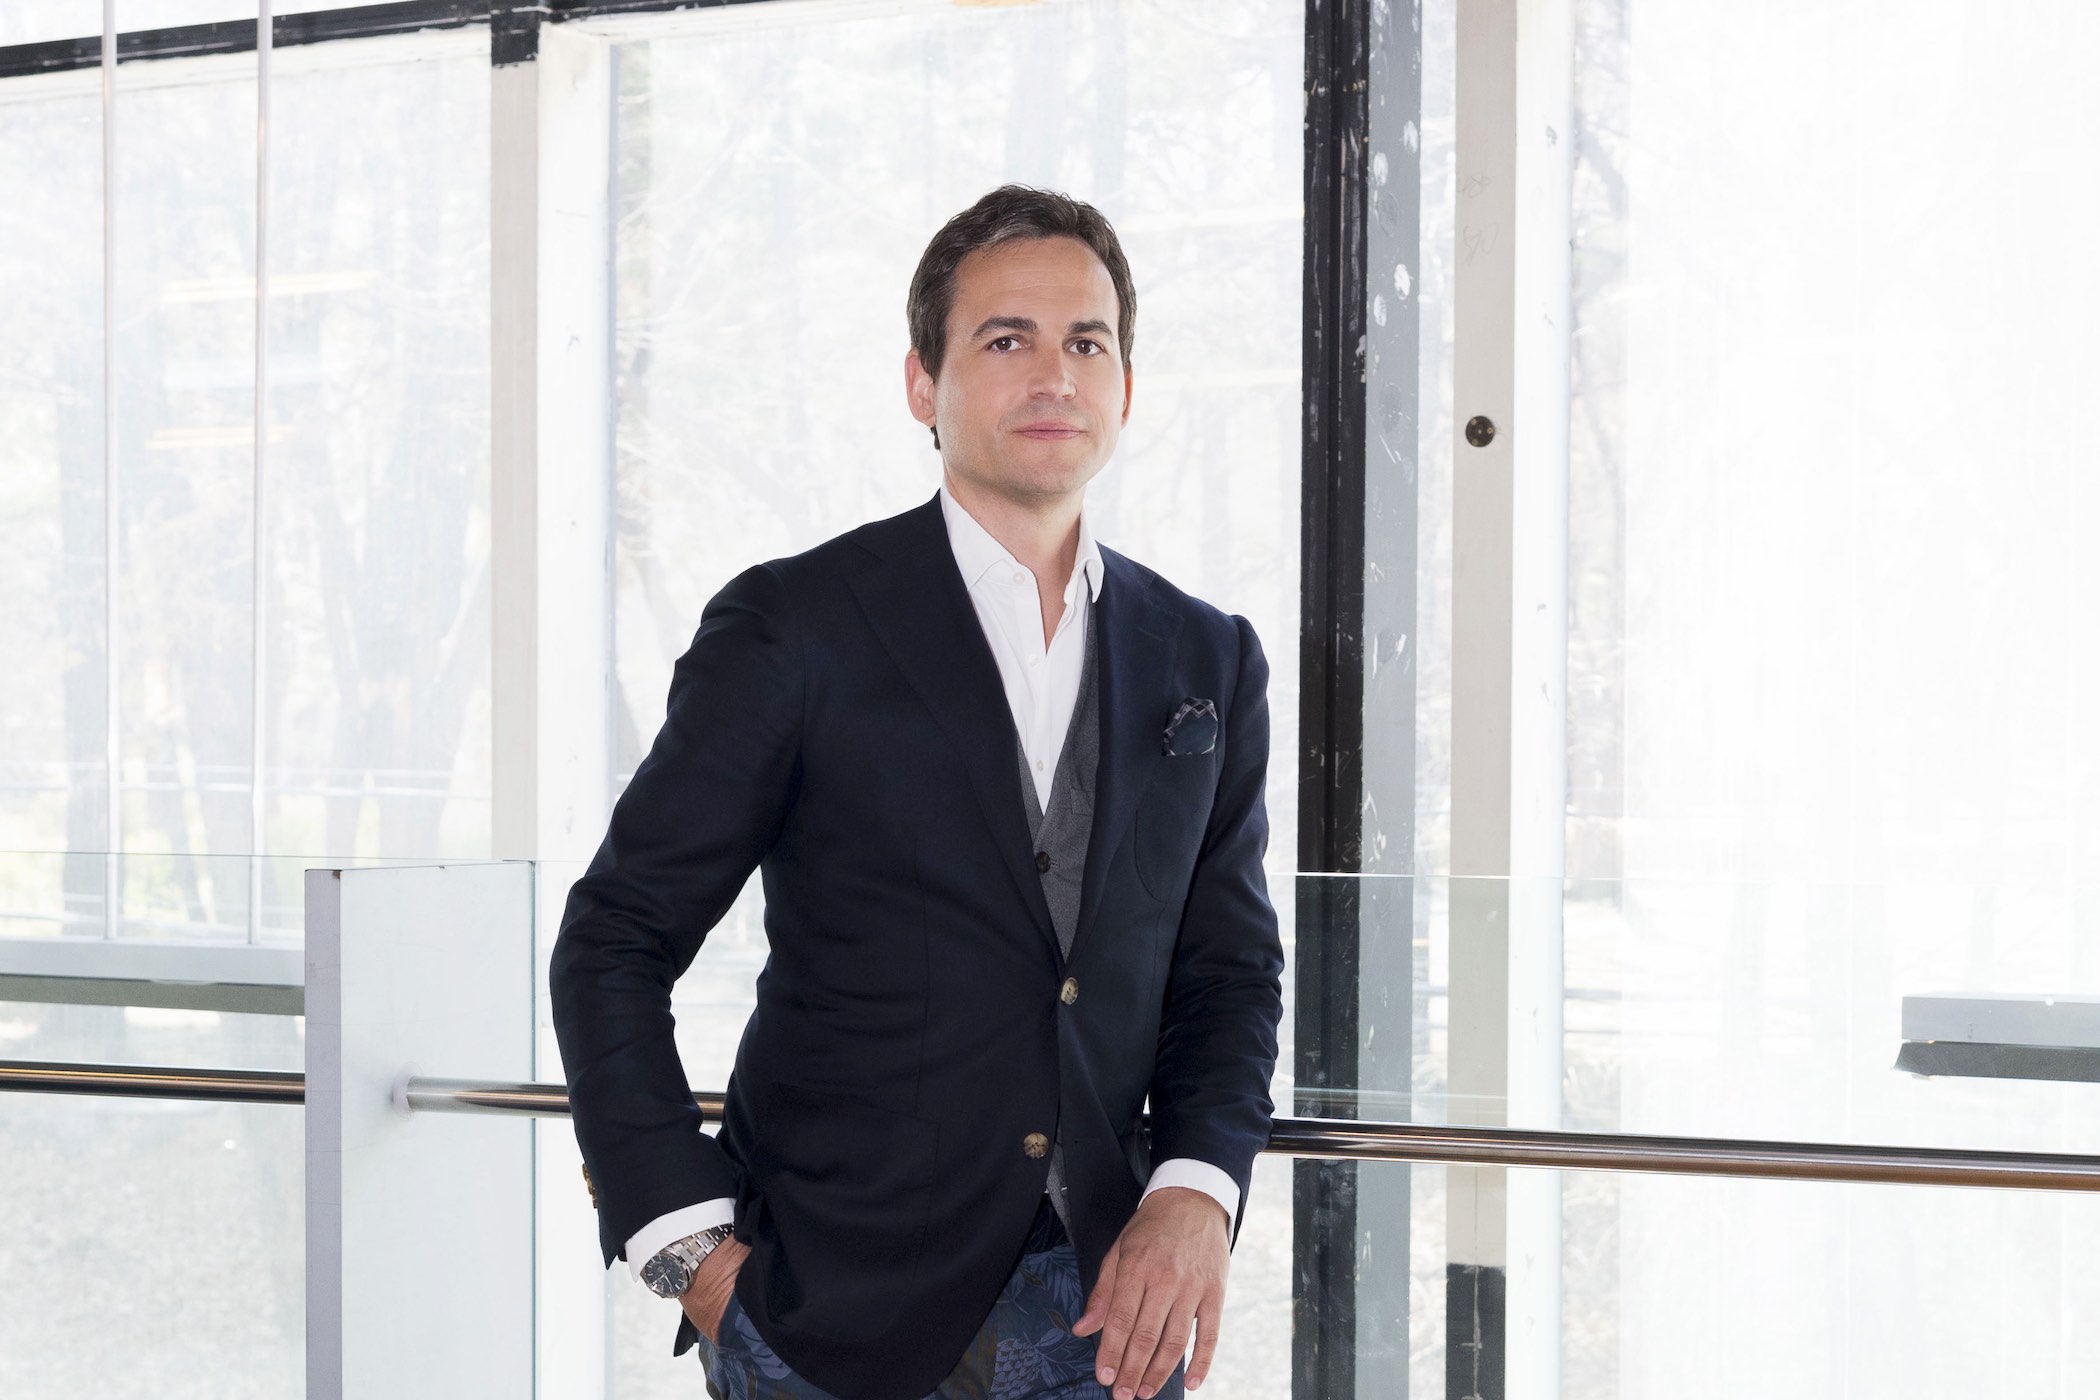 Maurice Lacroix Managing Director Stephane Waser interview